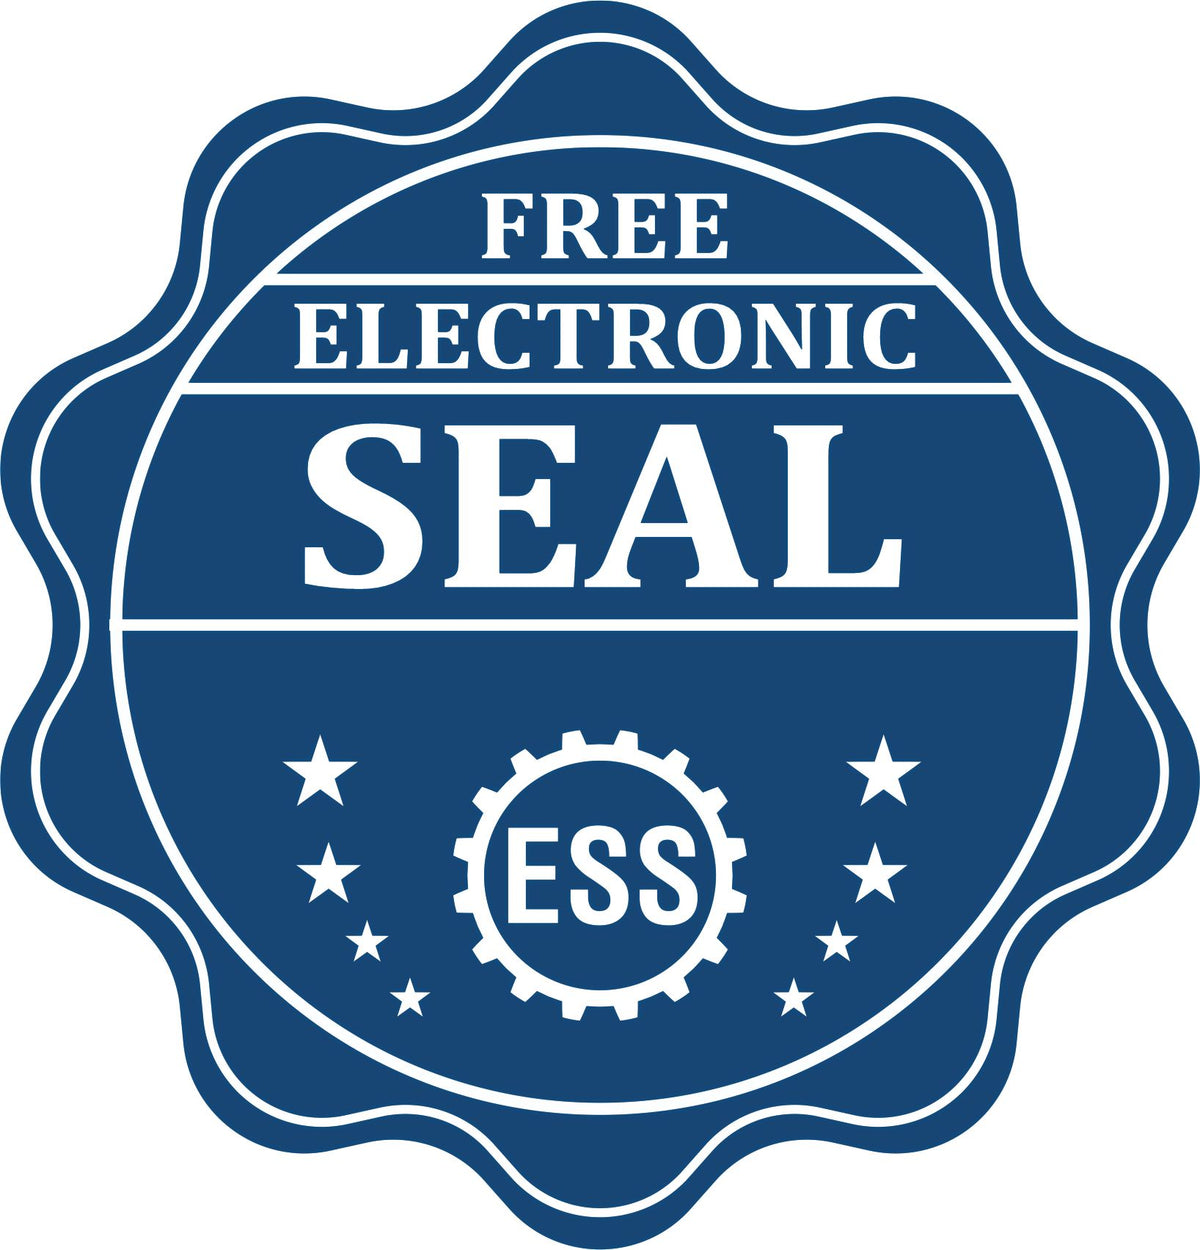 A badge showing a free electronic seal for the Handheld Nevada Professional Geologist Embosser with stars and the ESS gear on the emblem.